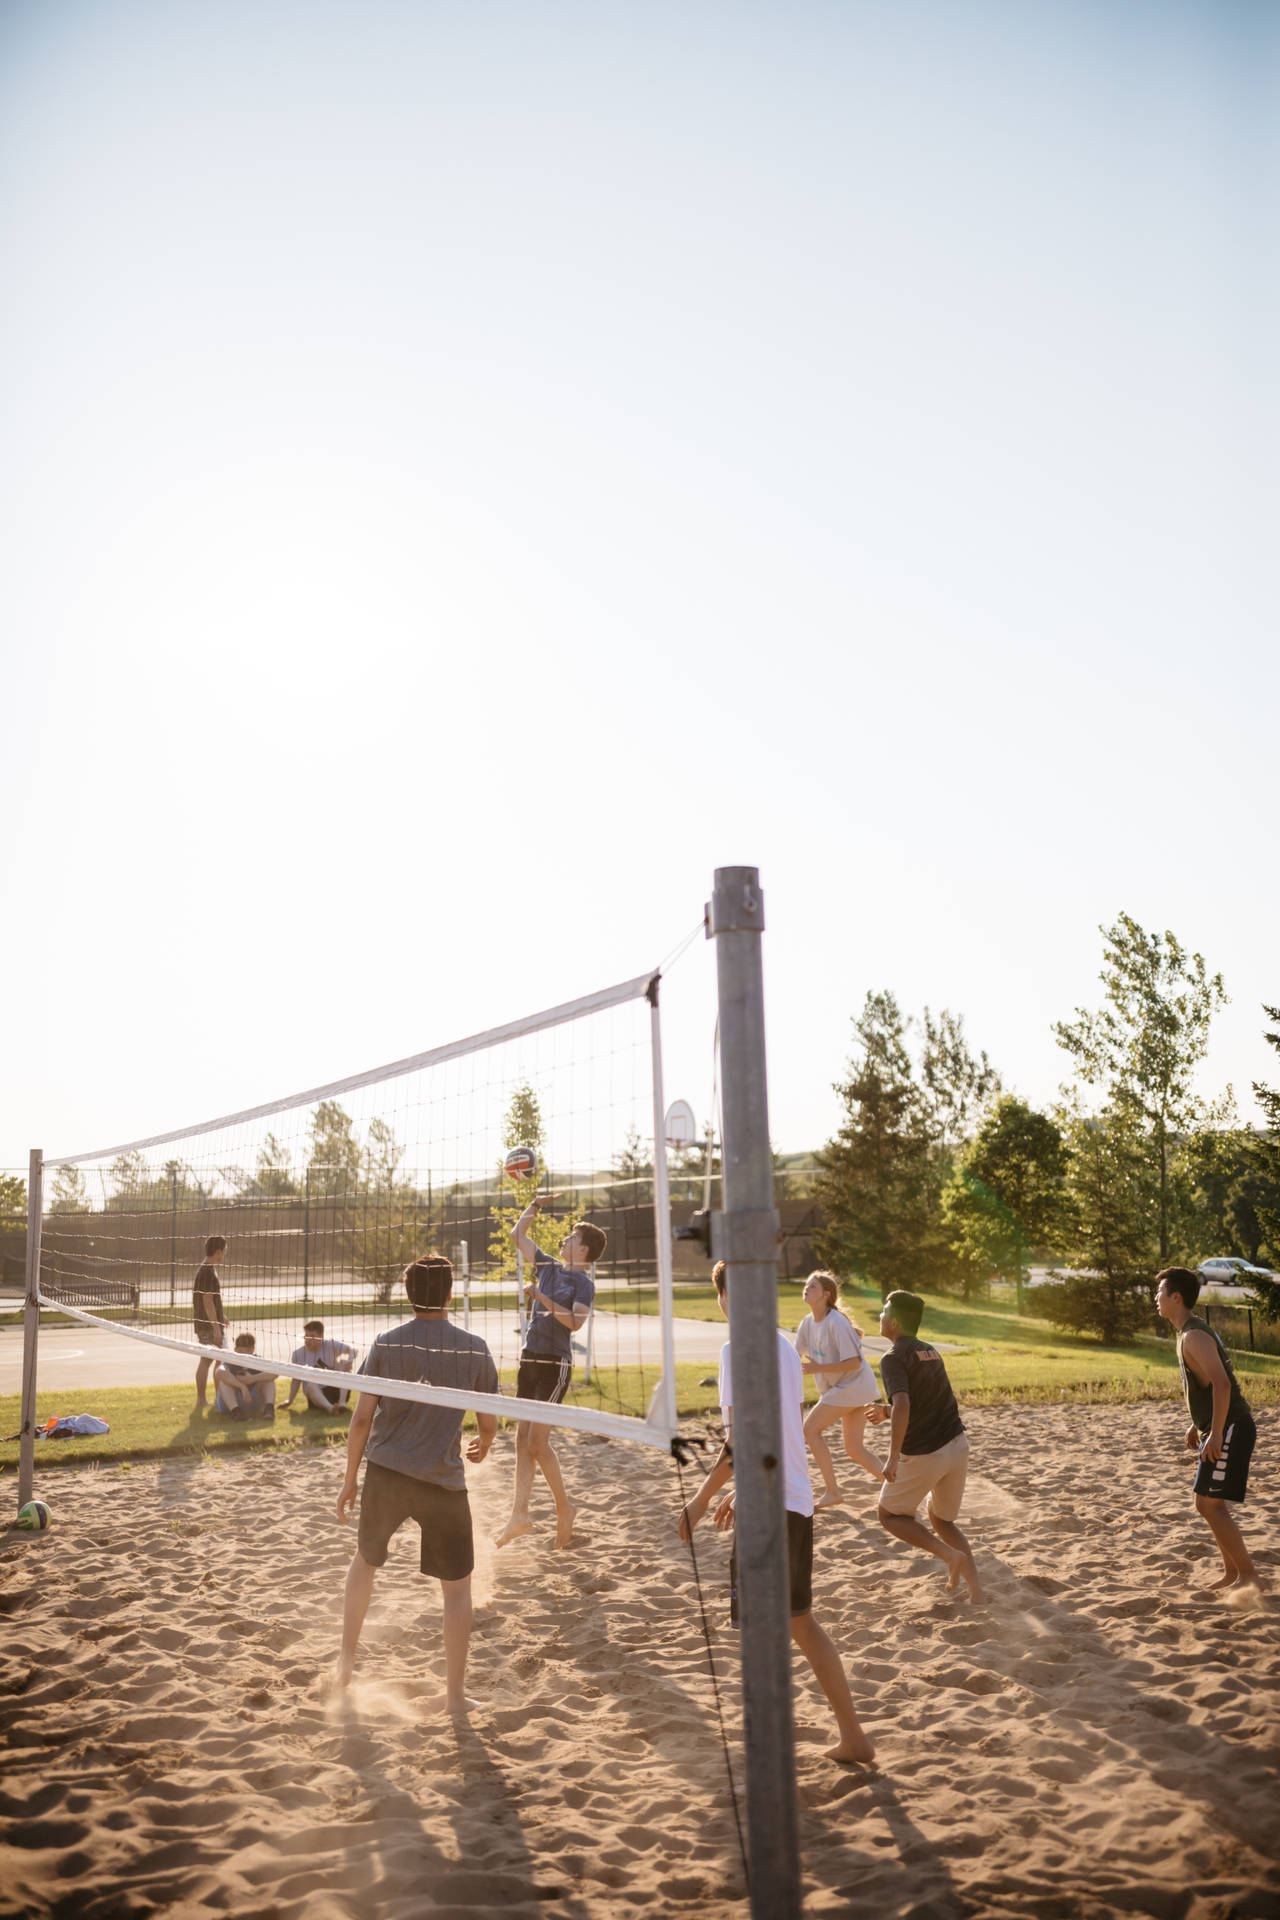 Volleyball On Artificial Sand Beach